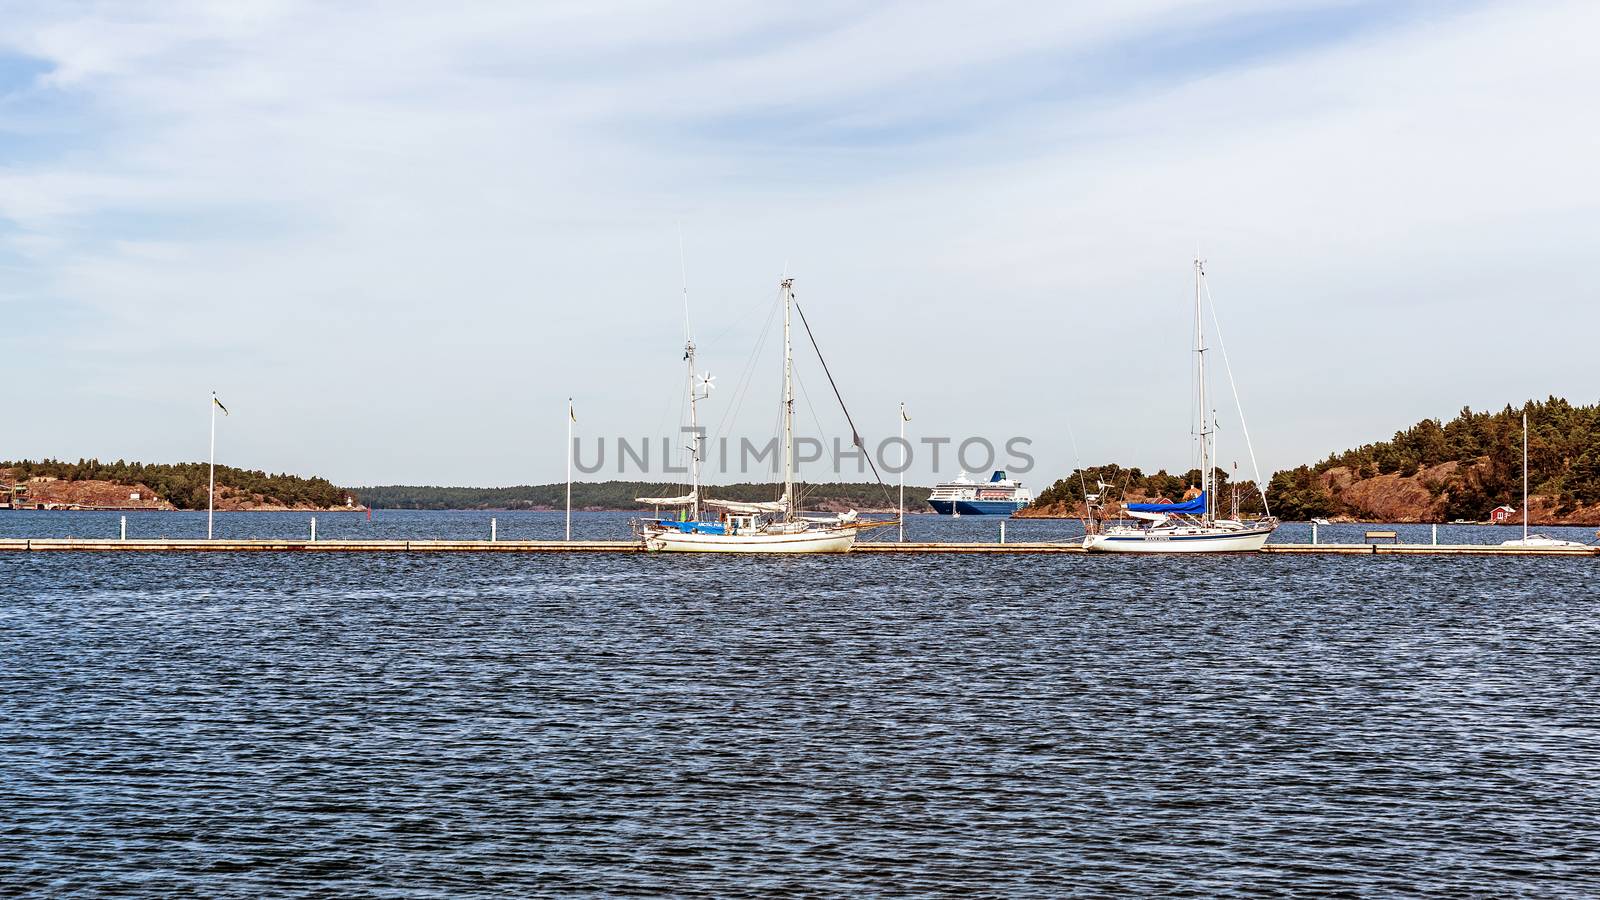 Landscape near Nynashamn, a big center for ferry transport offering services to Gotland, Poland and Russia. The city is also a well-known place of sailing events.